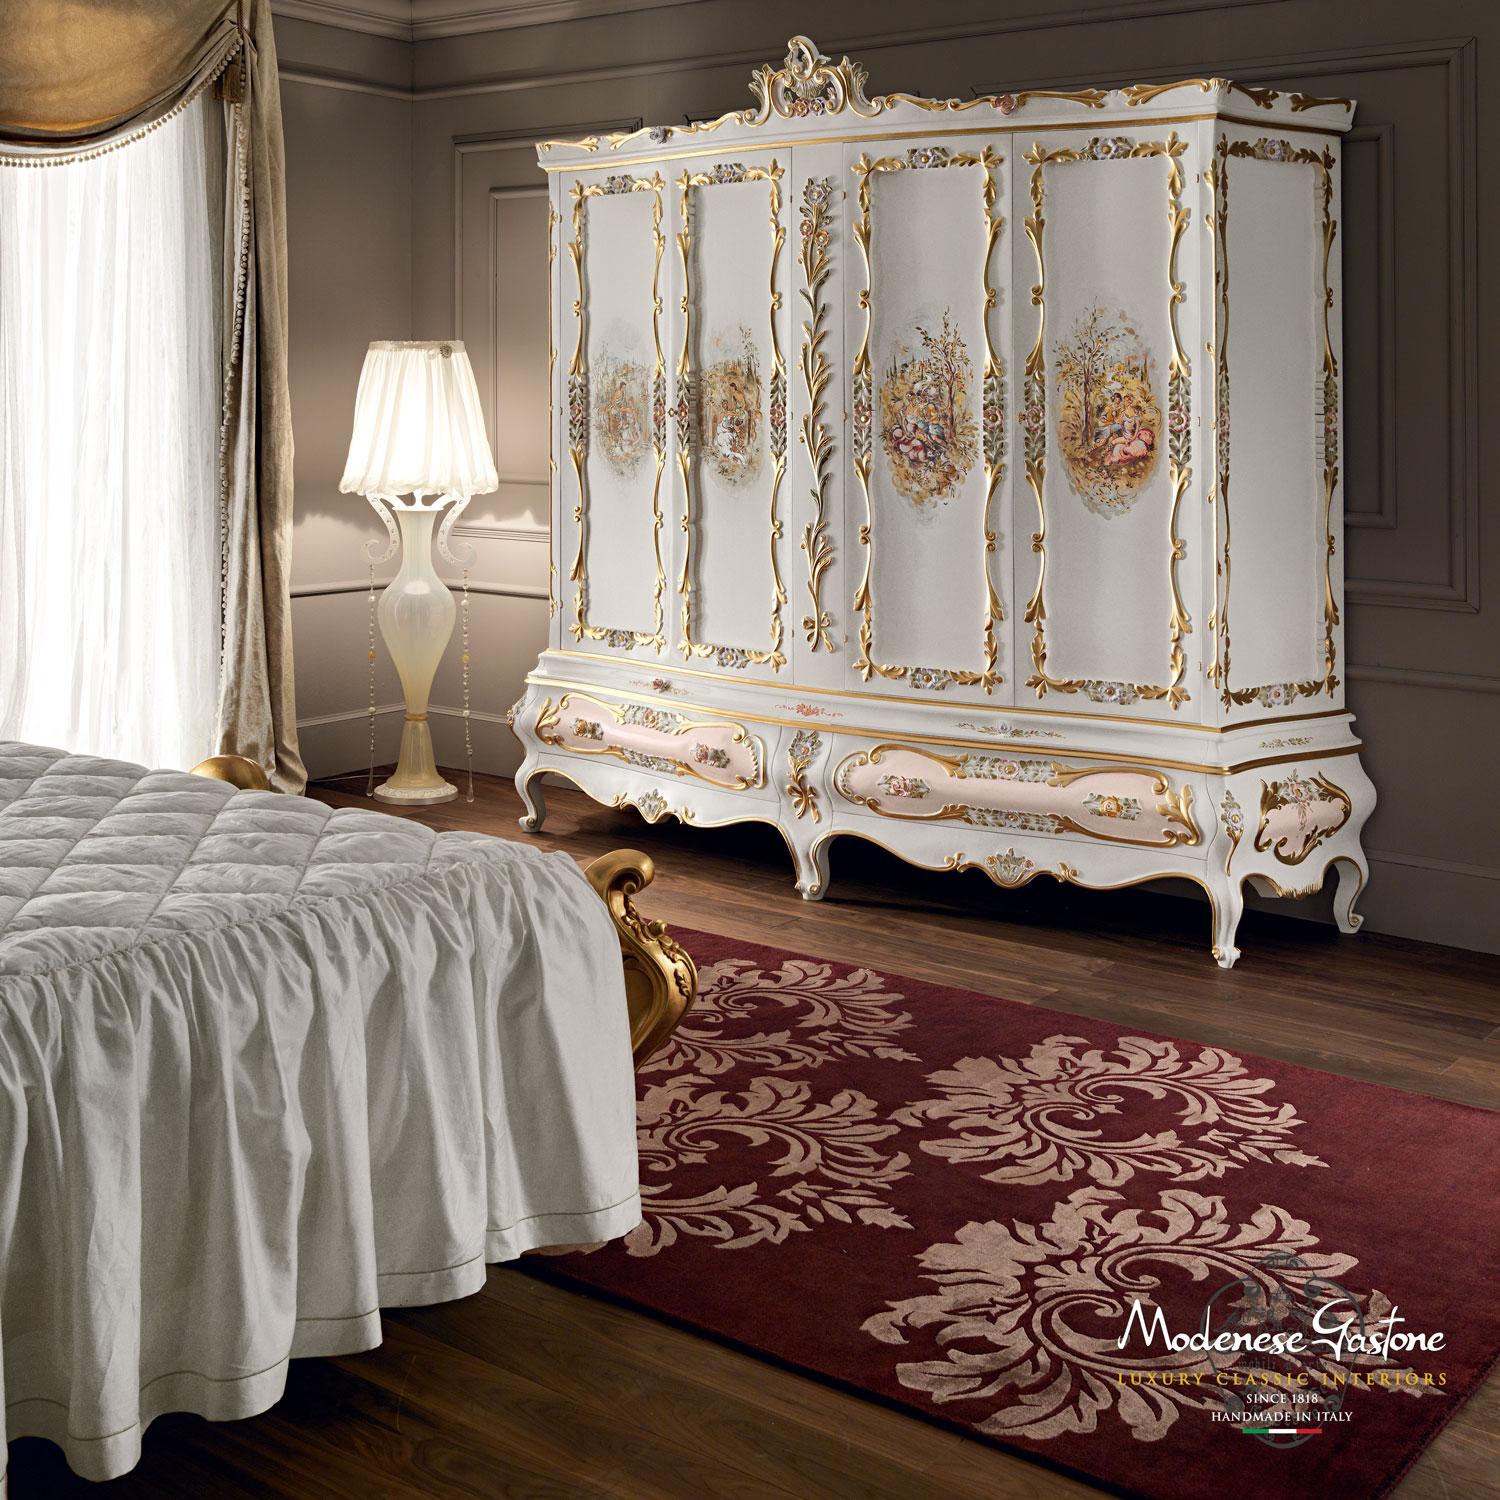 Complete your lavish classical bedroom with an exclusive Italian baroque touch by adding this Modenese Interiors masterpiece: four door wardrobe with handpainted artisanal decorations, squiggle carvings and gold leaf applications. The venetian